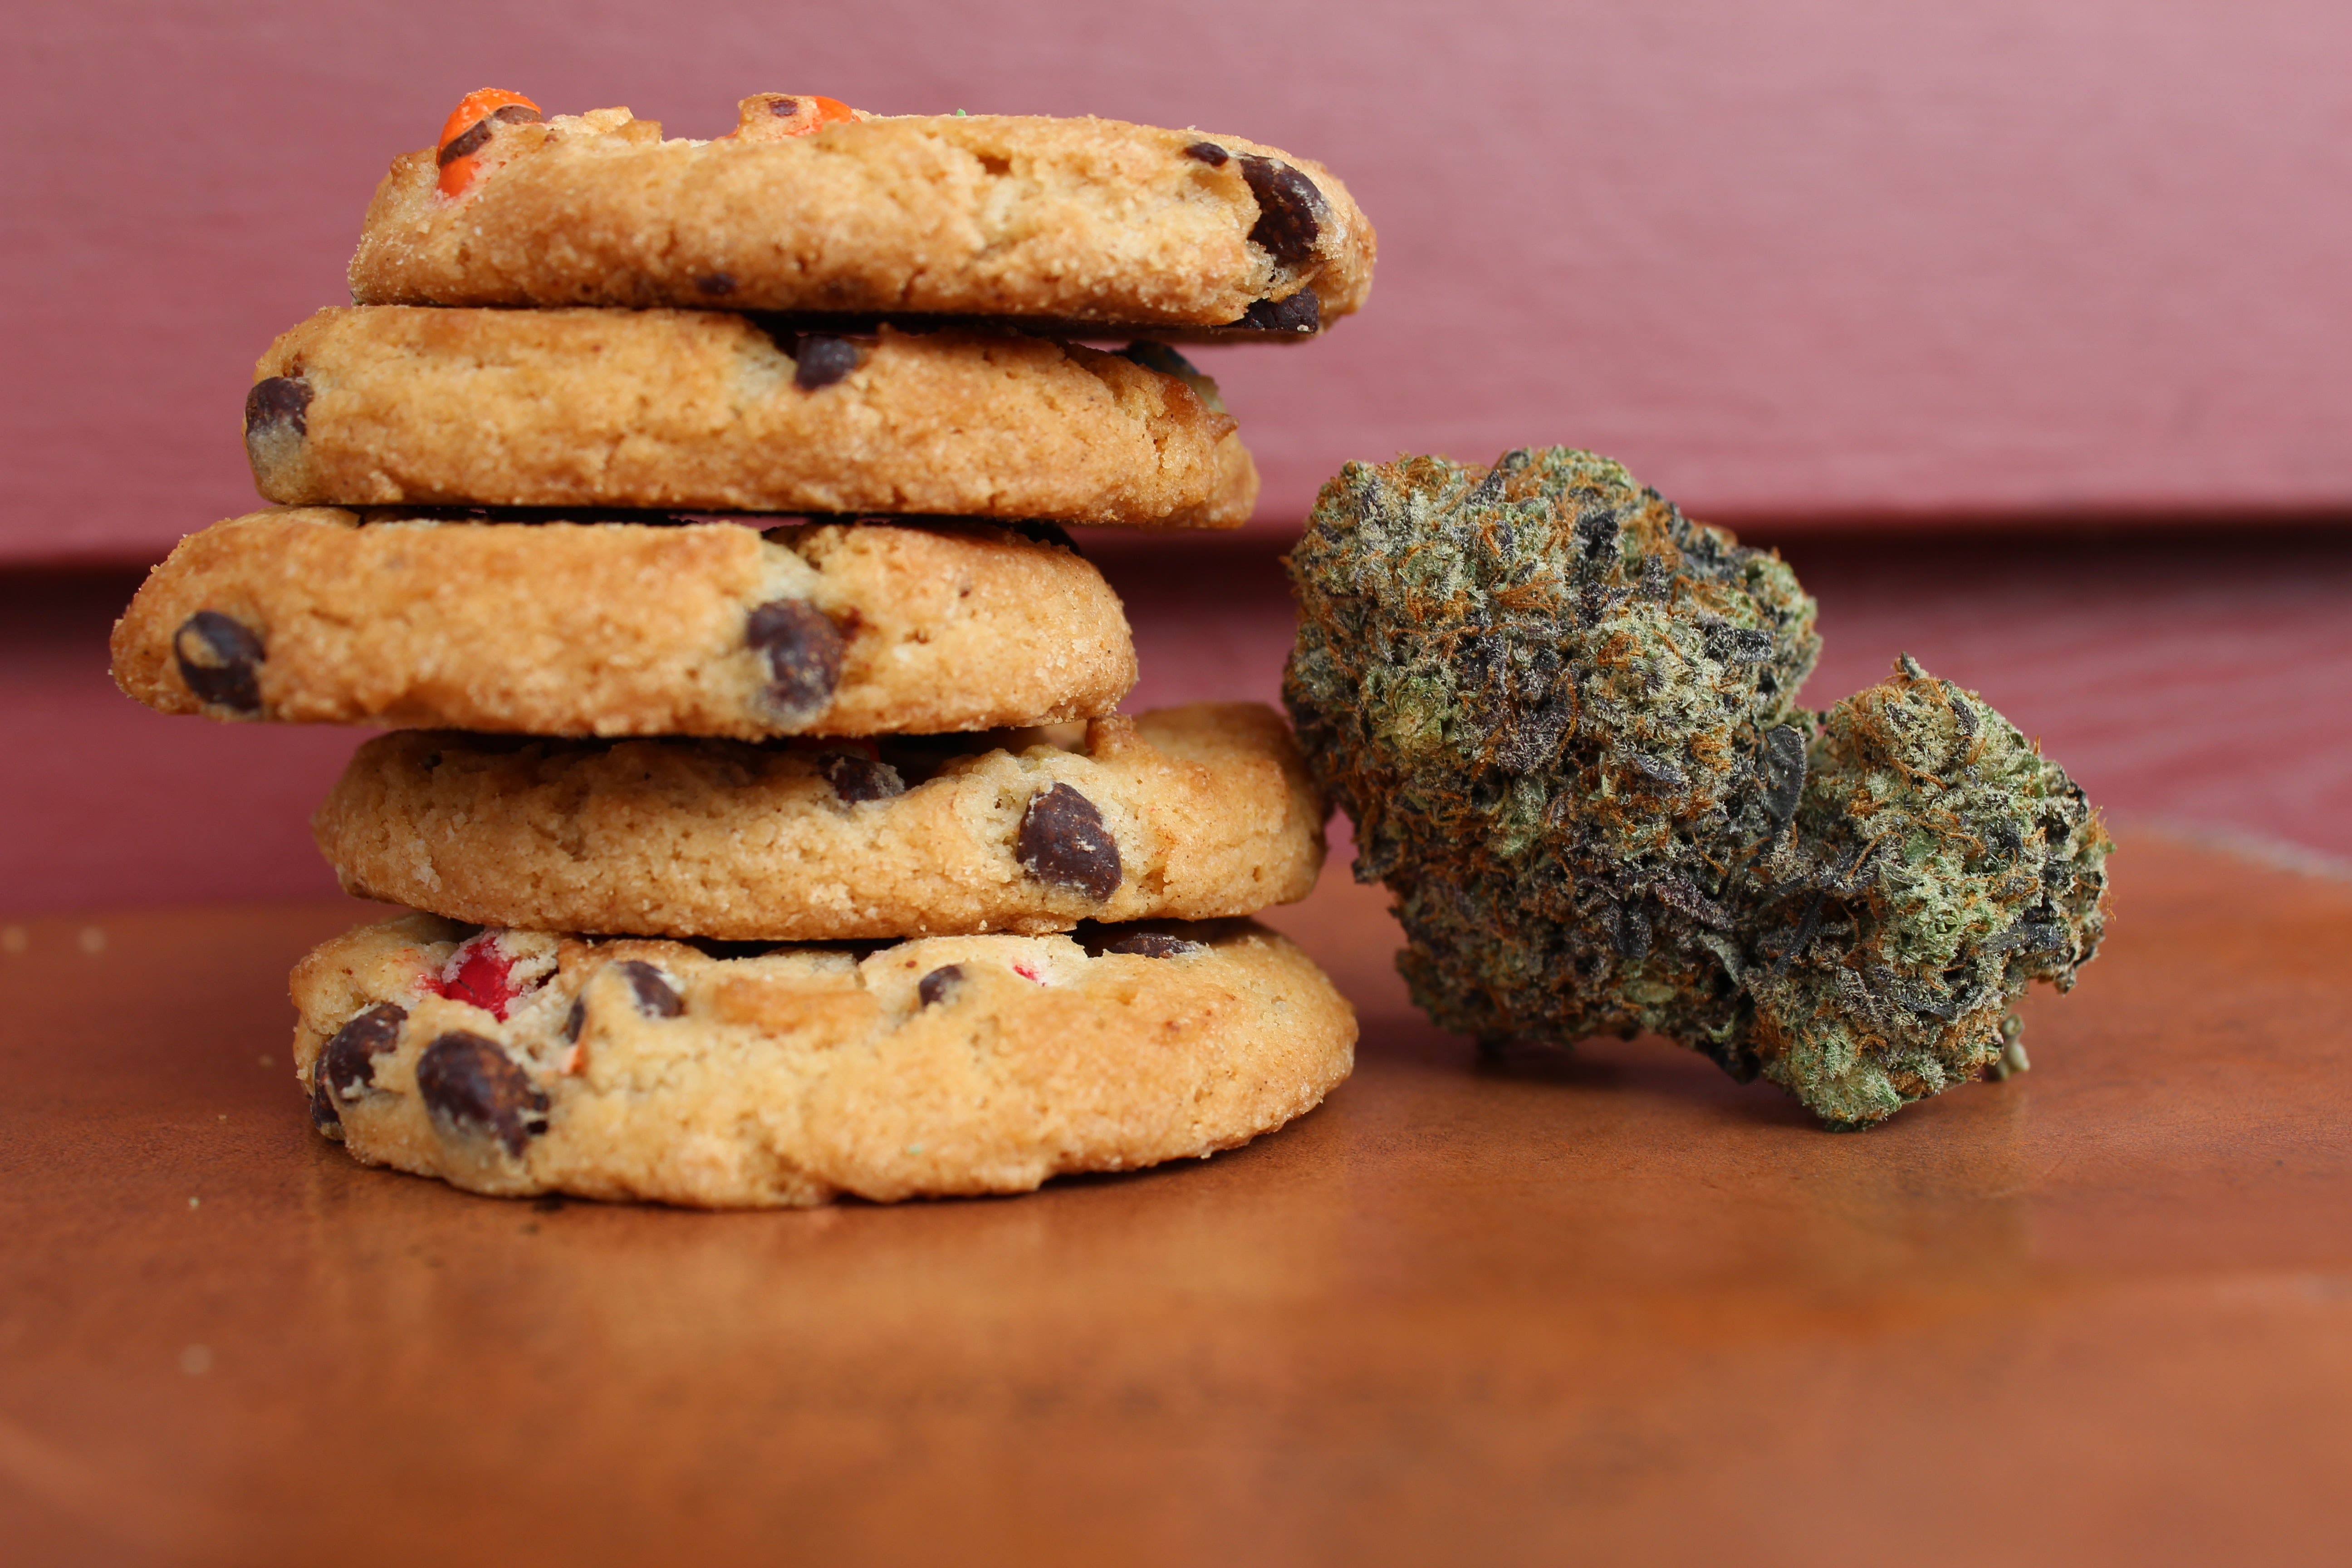 Glass House Brands To Acquire California Cannabis Edibles Manufacturer For $25.6M